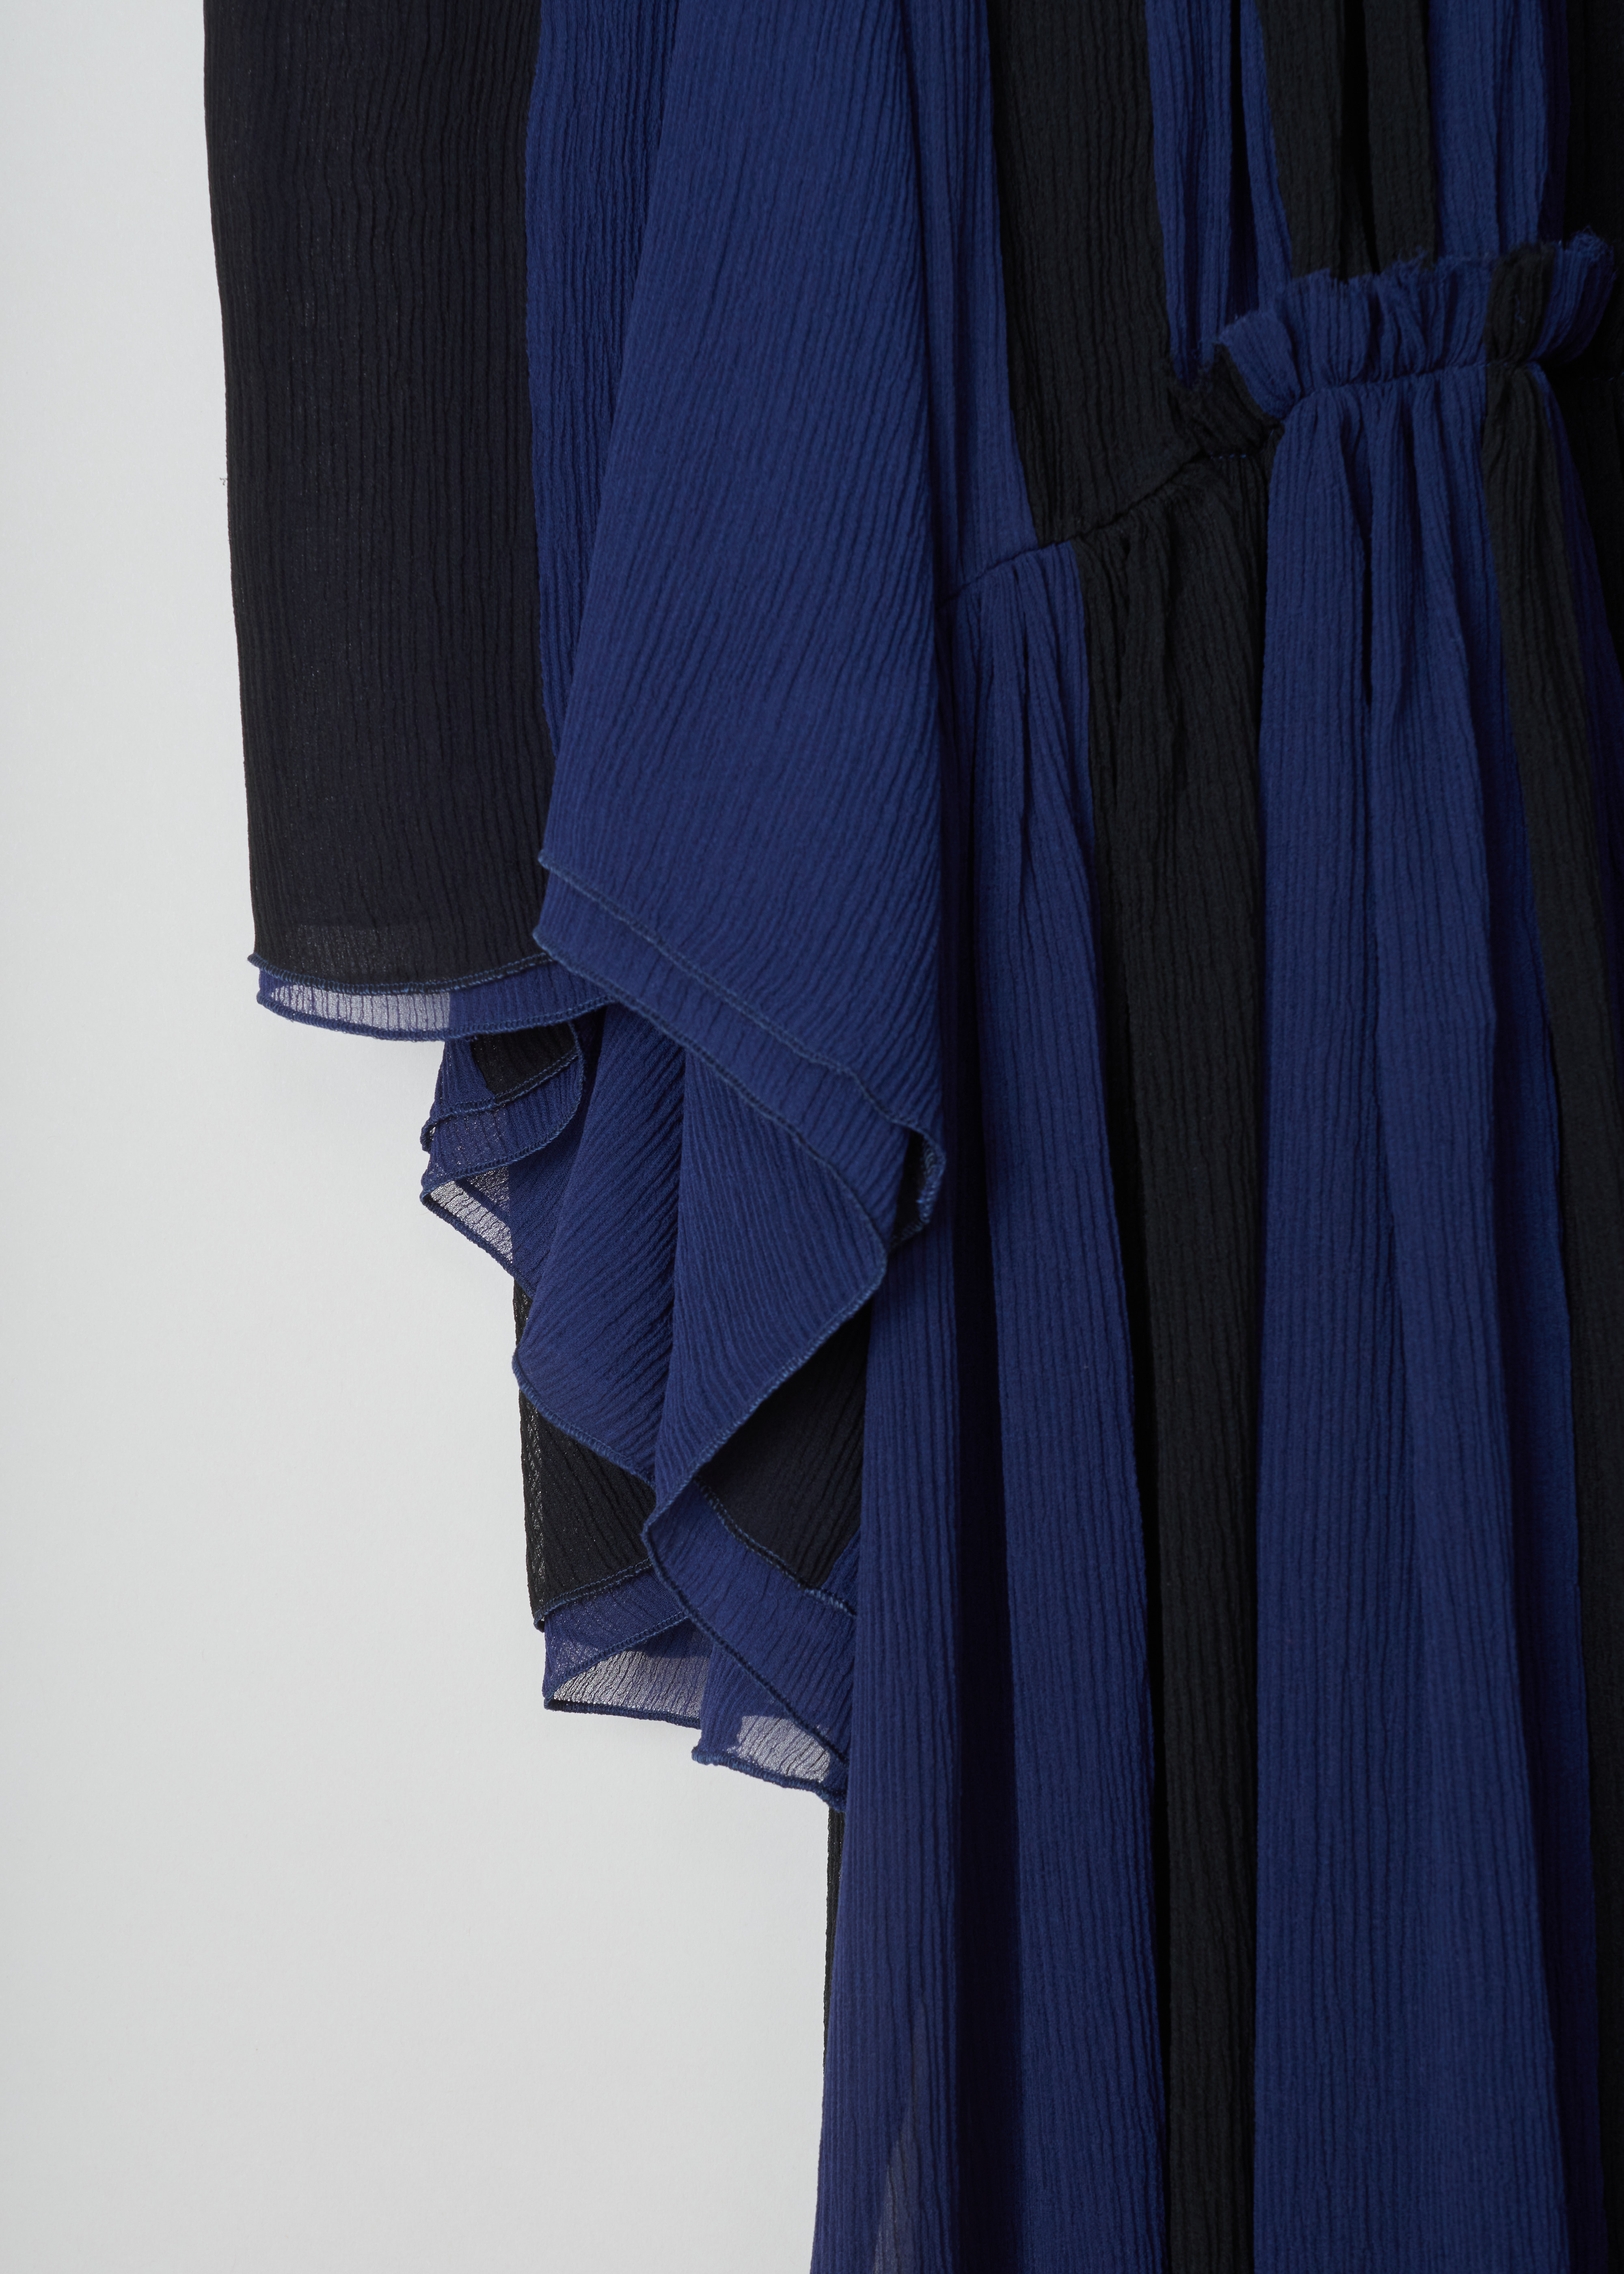 ChloÃ© Gathered slik crepe dress CHC19ARO37006925_925_Black_Blue detail. This chic silk crepe dress has a blue and black vertically striped pattern. A gathered round neckline and ruffled sheer long sleeves. A ruffled waist and flared gathered midi skirt. 